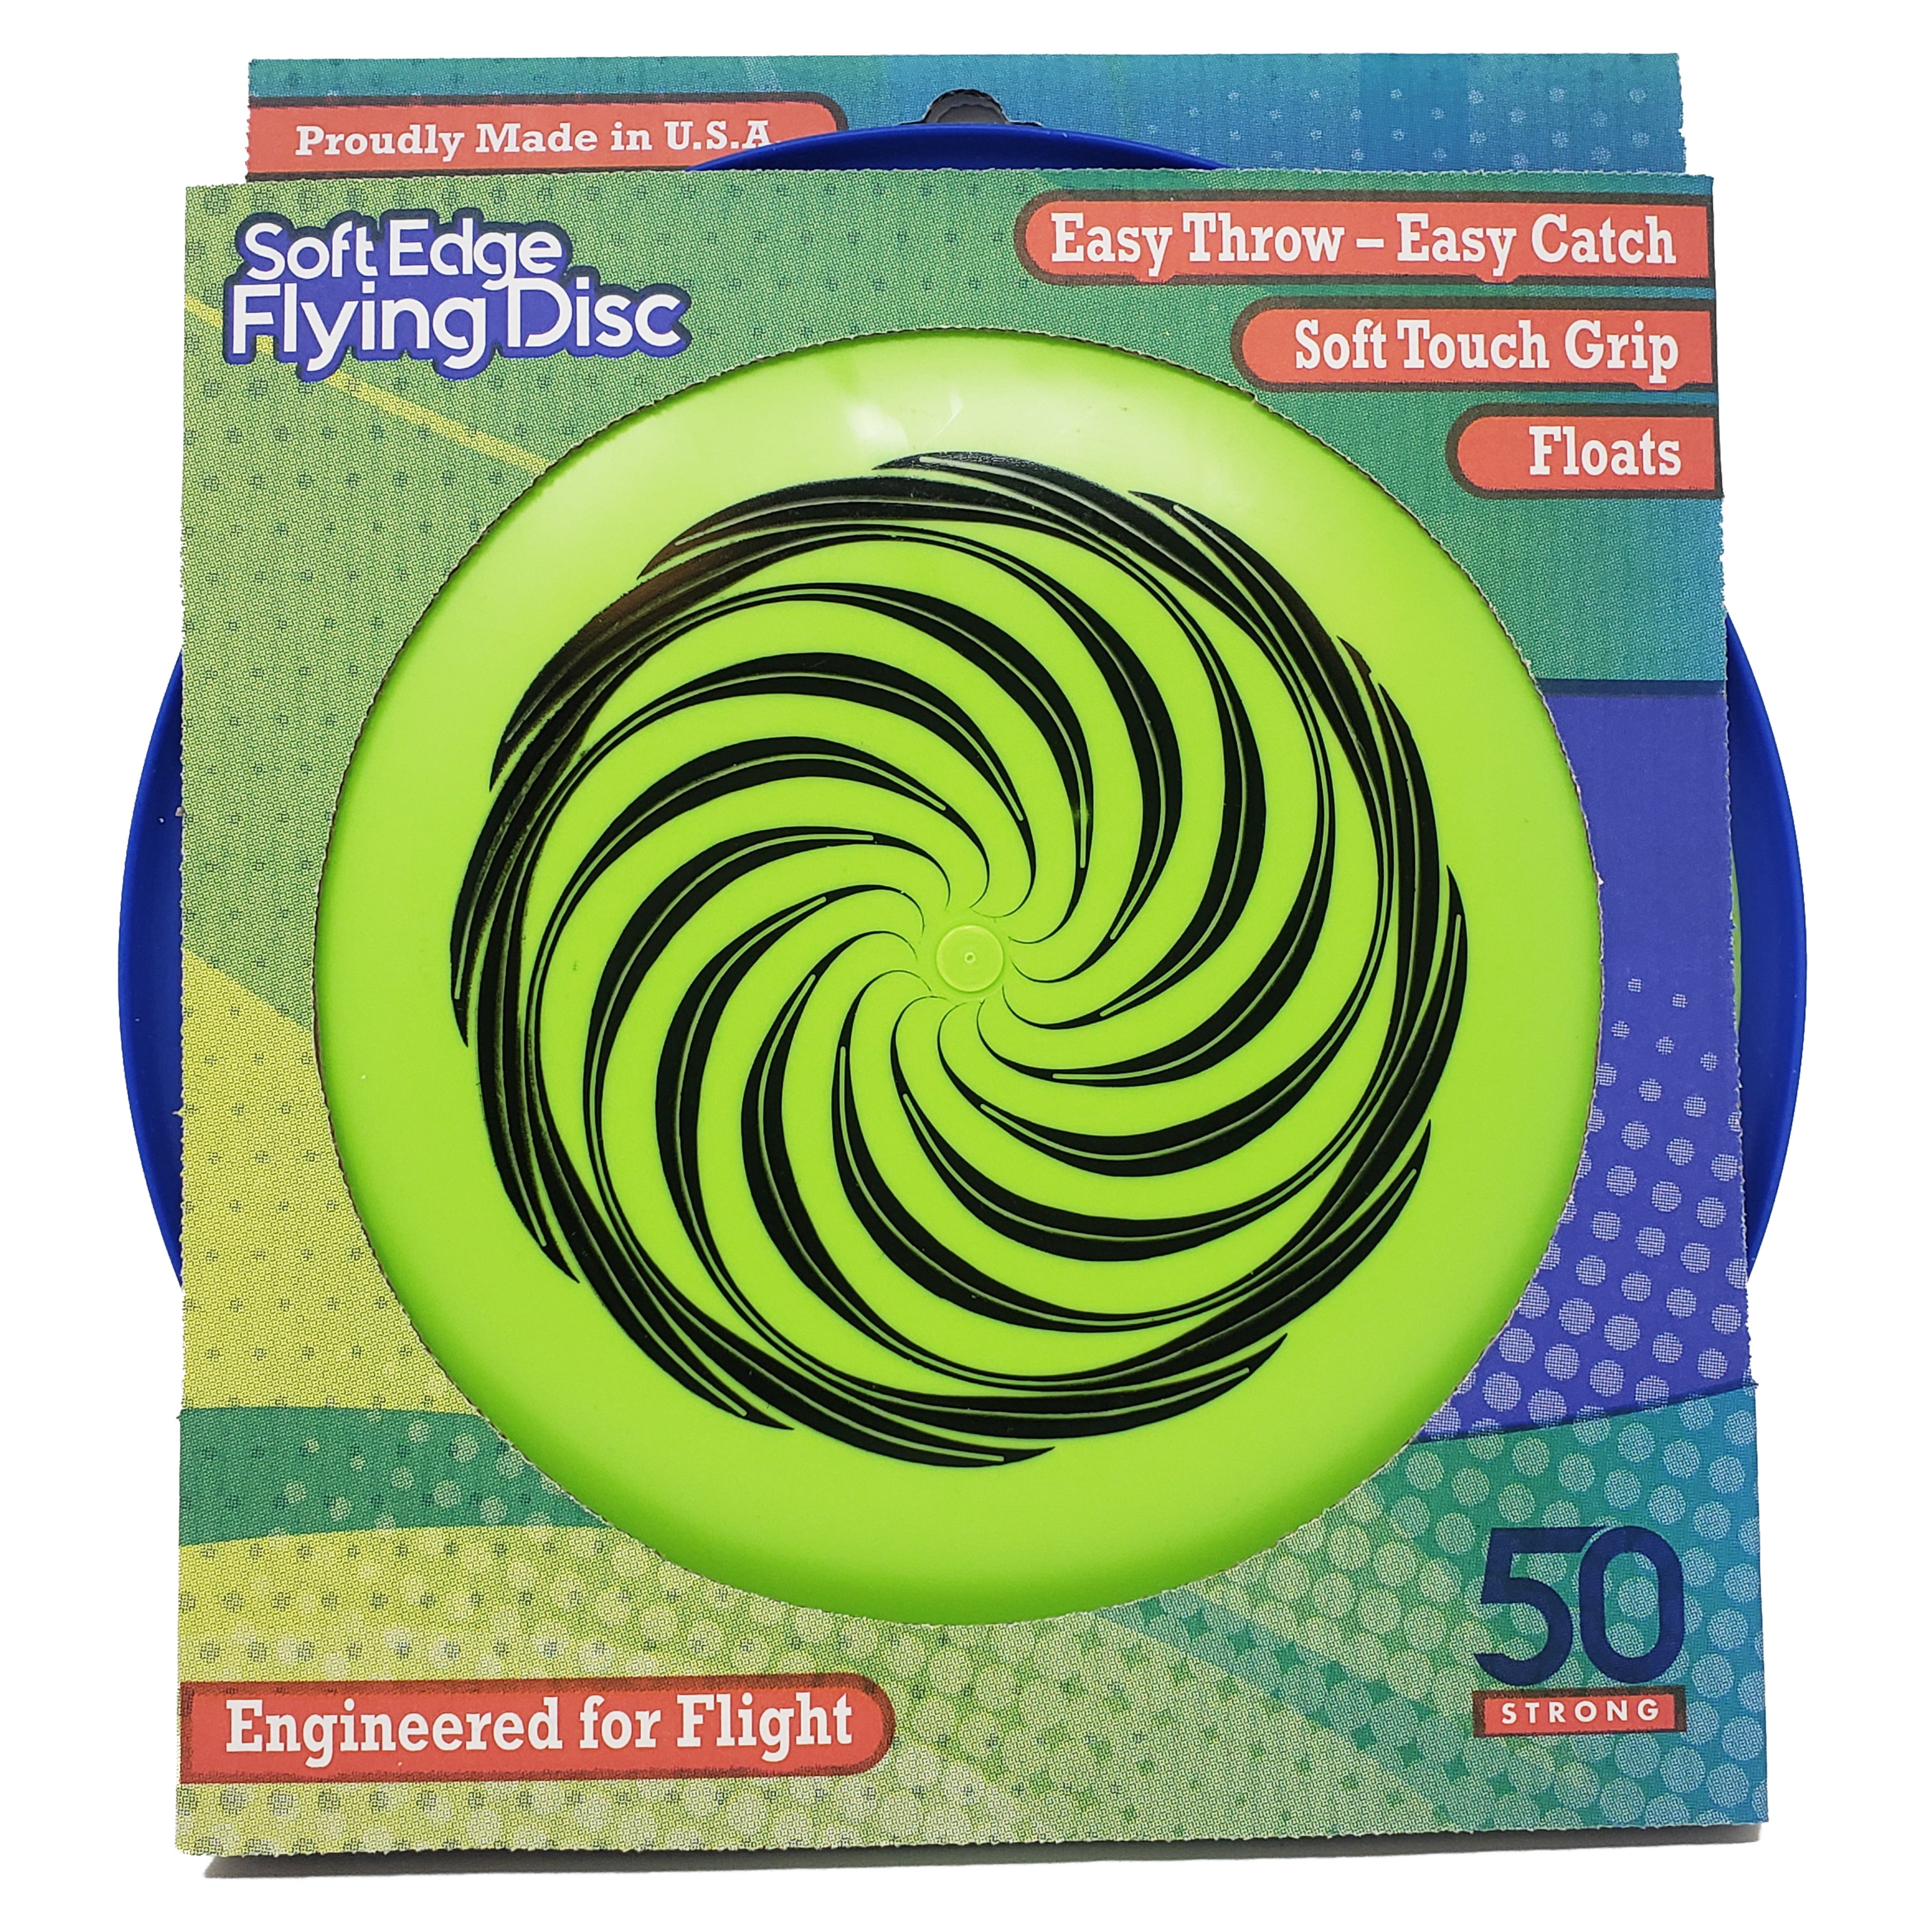 Fun Game for Summer Made in USA 50 Strong Ultimate Frisbee 175 gram Flying Sporting Disc One Disc Best Beach Toy for Kids and Adults